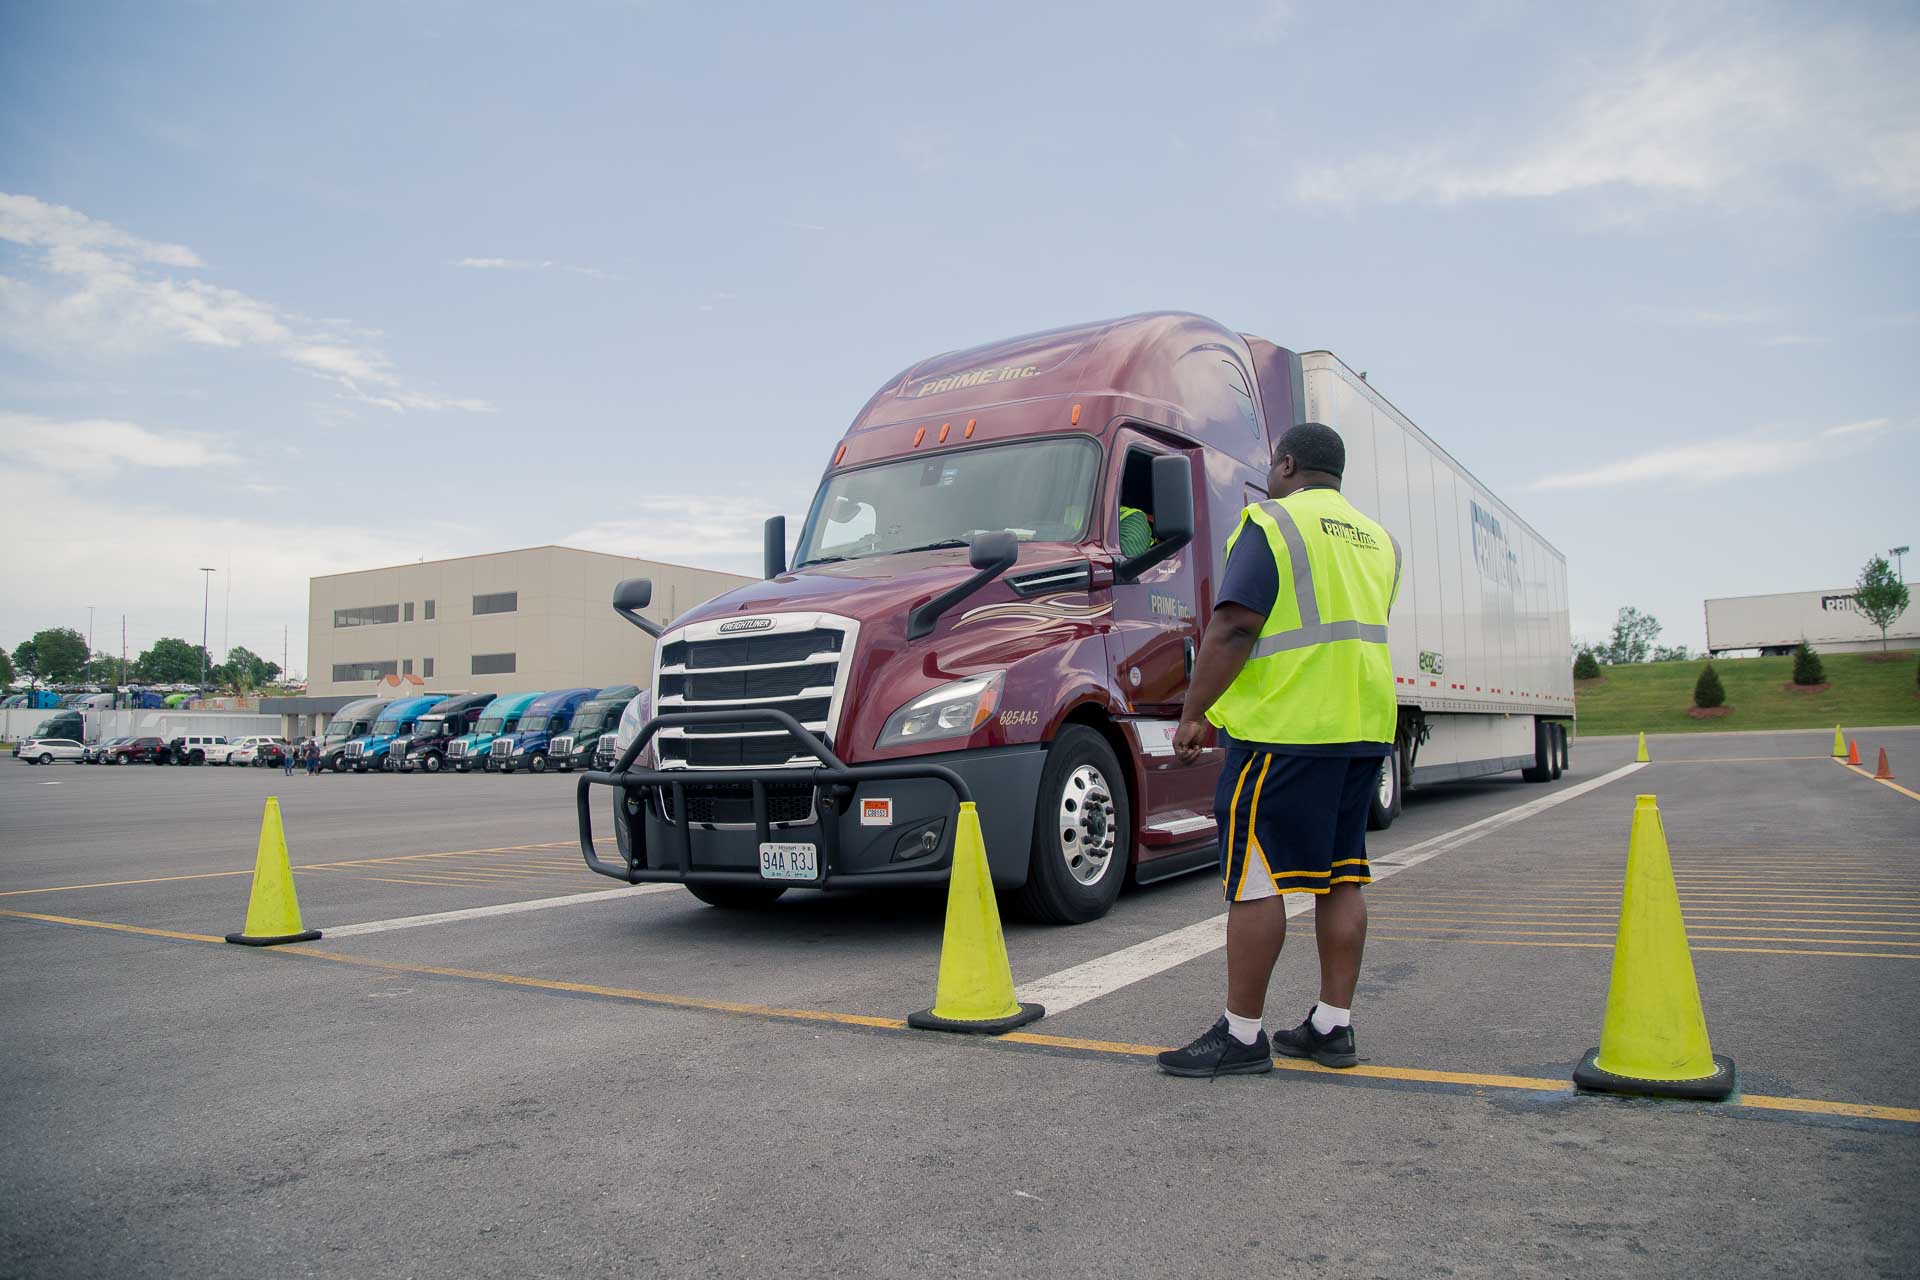 A Prime driving instructor observing a student driver in a red semi-truck driving in a parking lot.